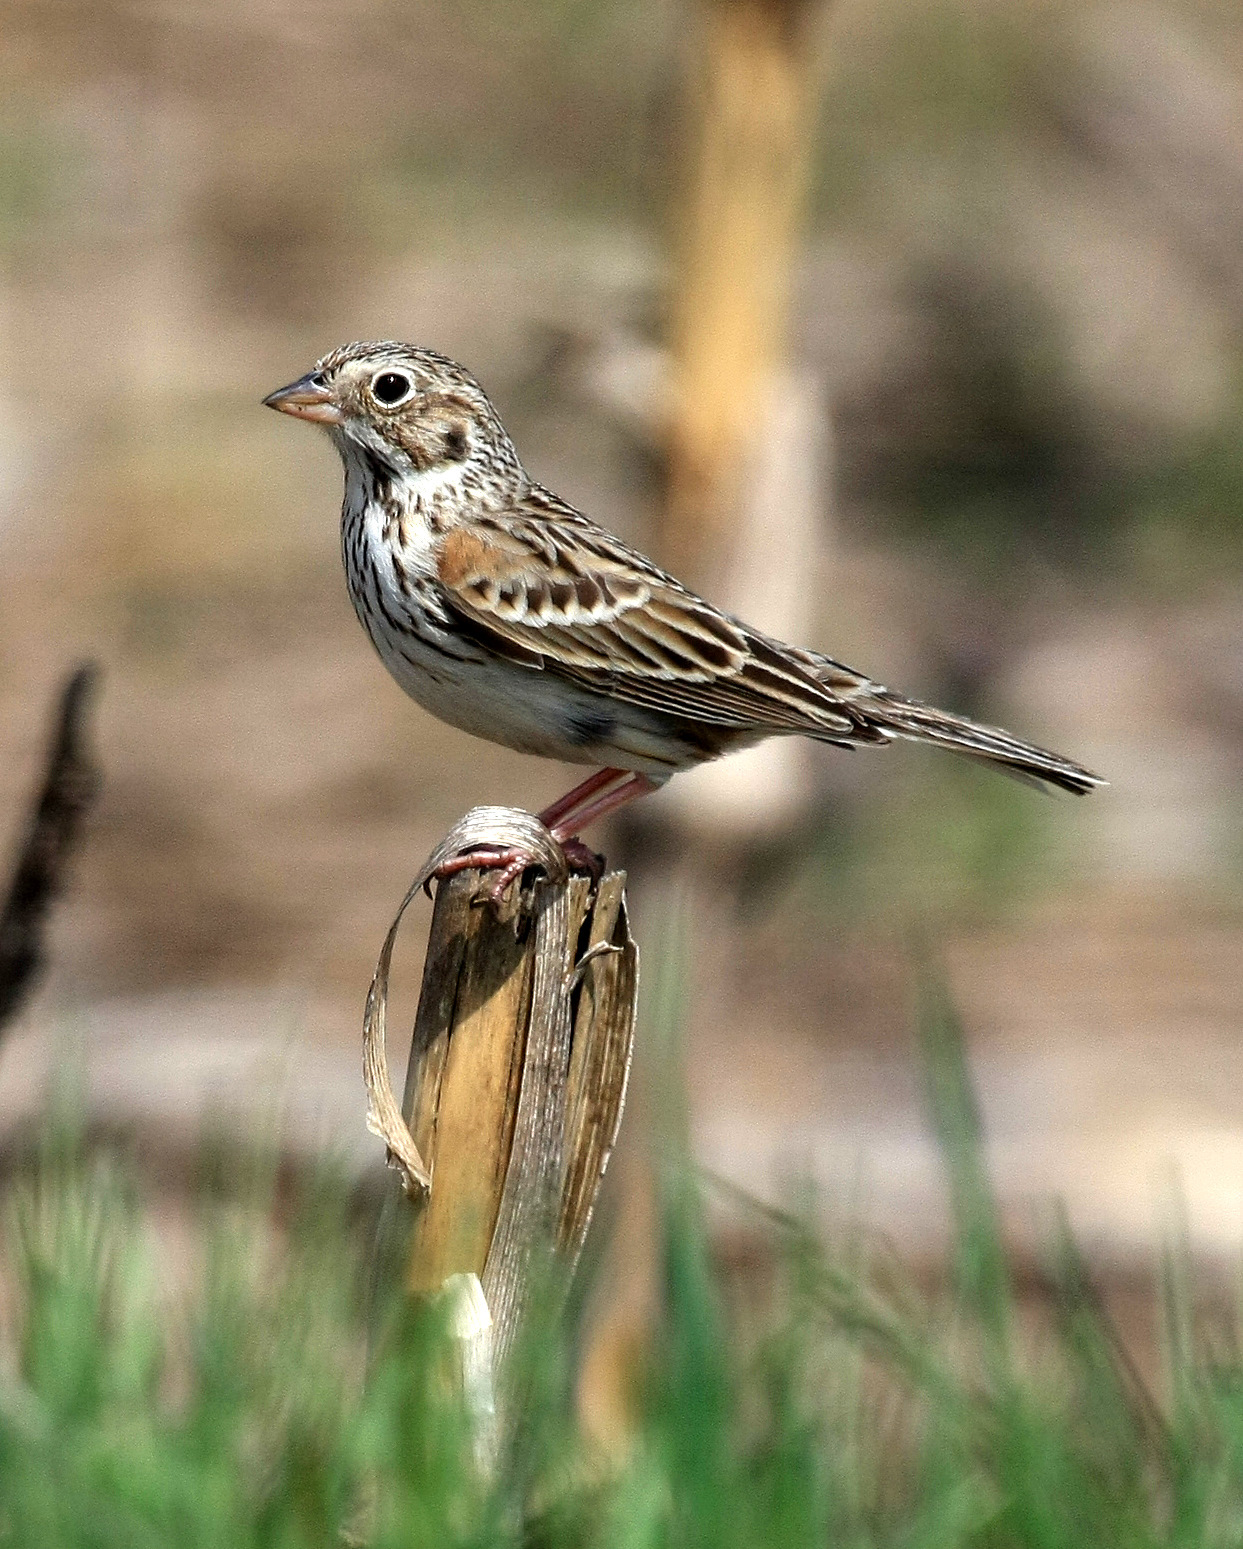 The Vesper Sparrow's chestnut shoulder patch is a helpful field mark, when it's white tail edges are not visible. Photo: Tim Lenz/CC BY 2.0